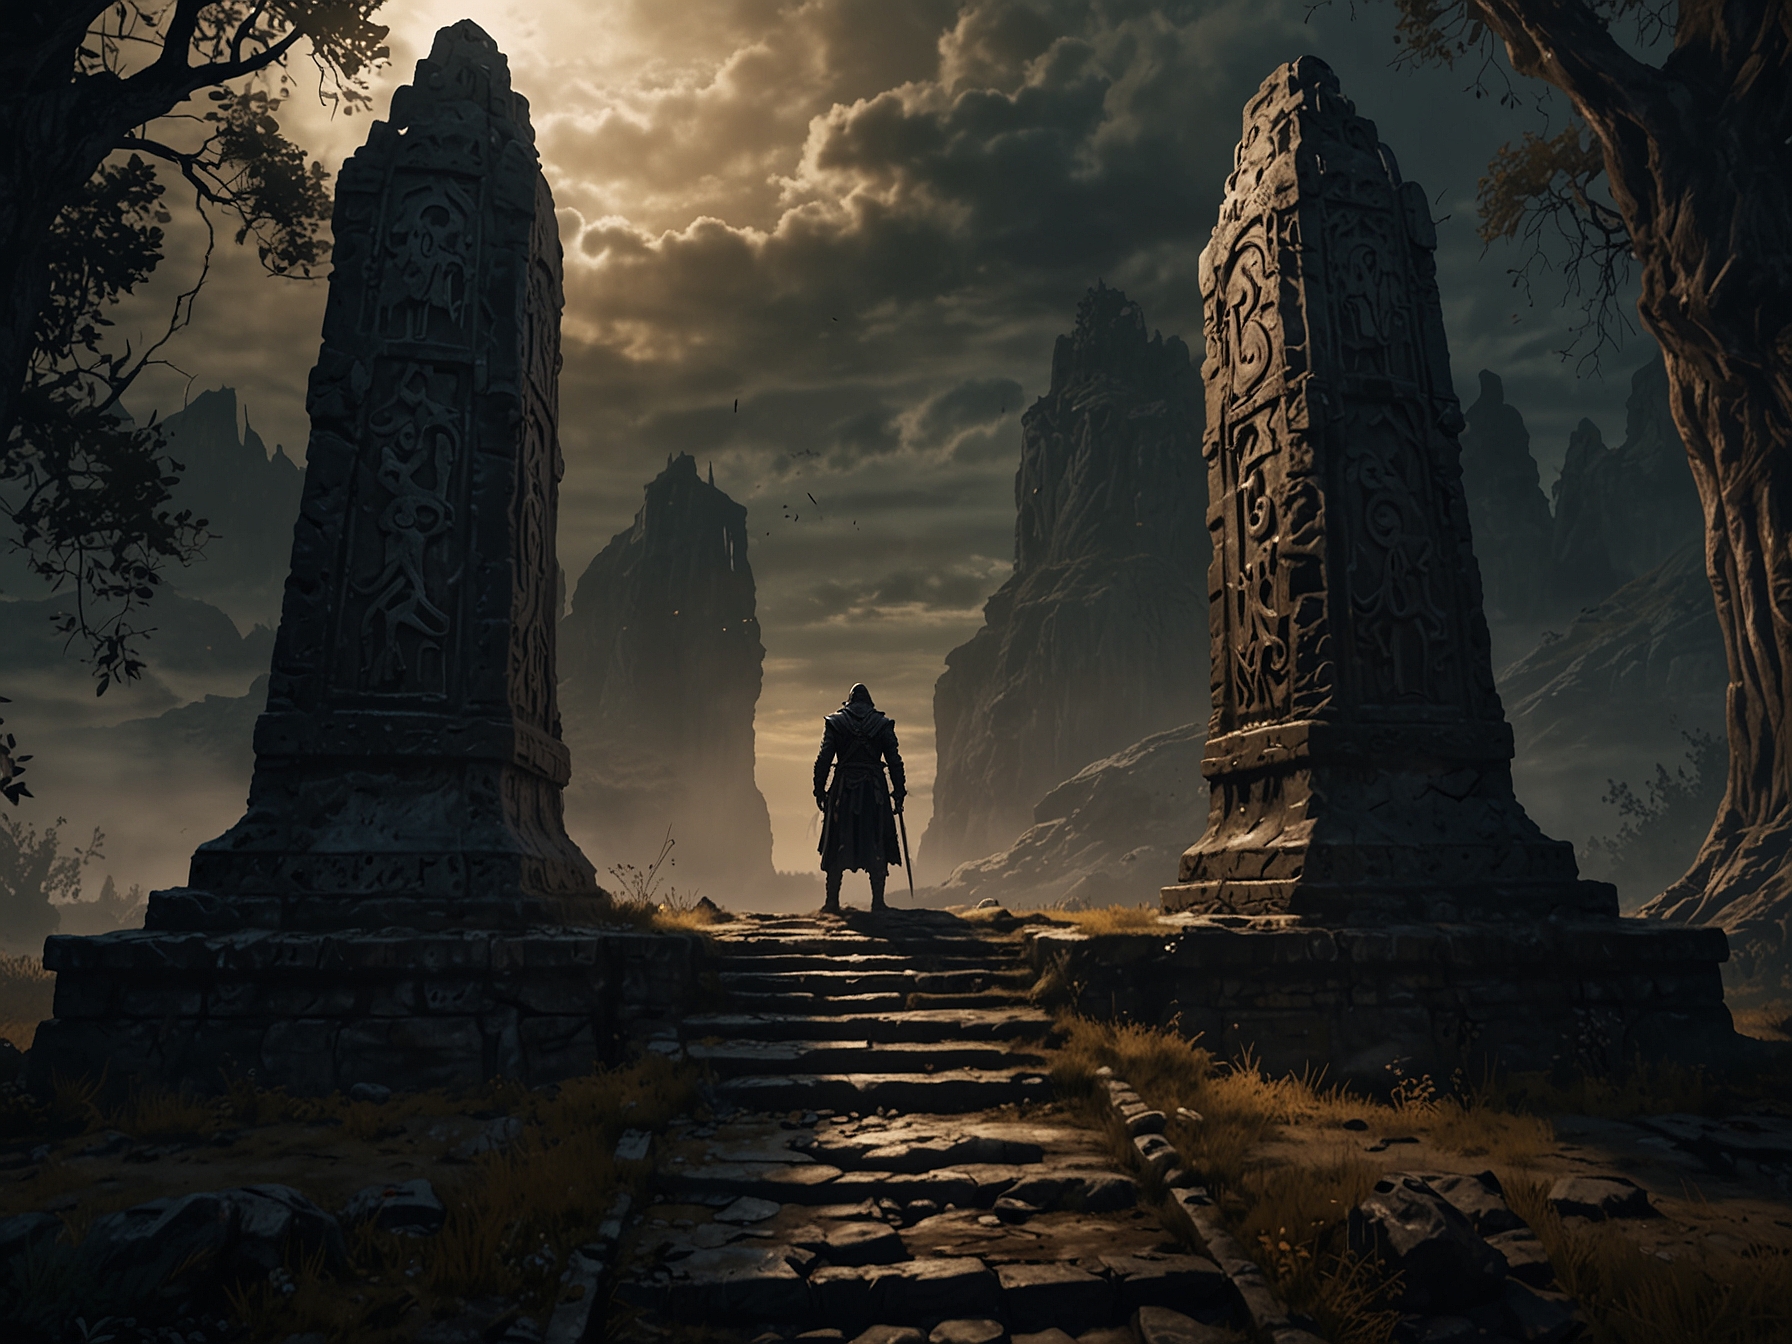 A player character in Elden Ring: Shadow of the Erdtree standing in the eerie landscape of the Land of Shadow, approaching the entrance to the Shadowed Crypts flanked by two towering statues.